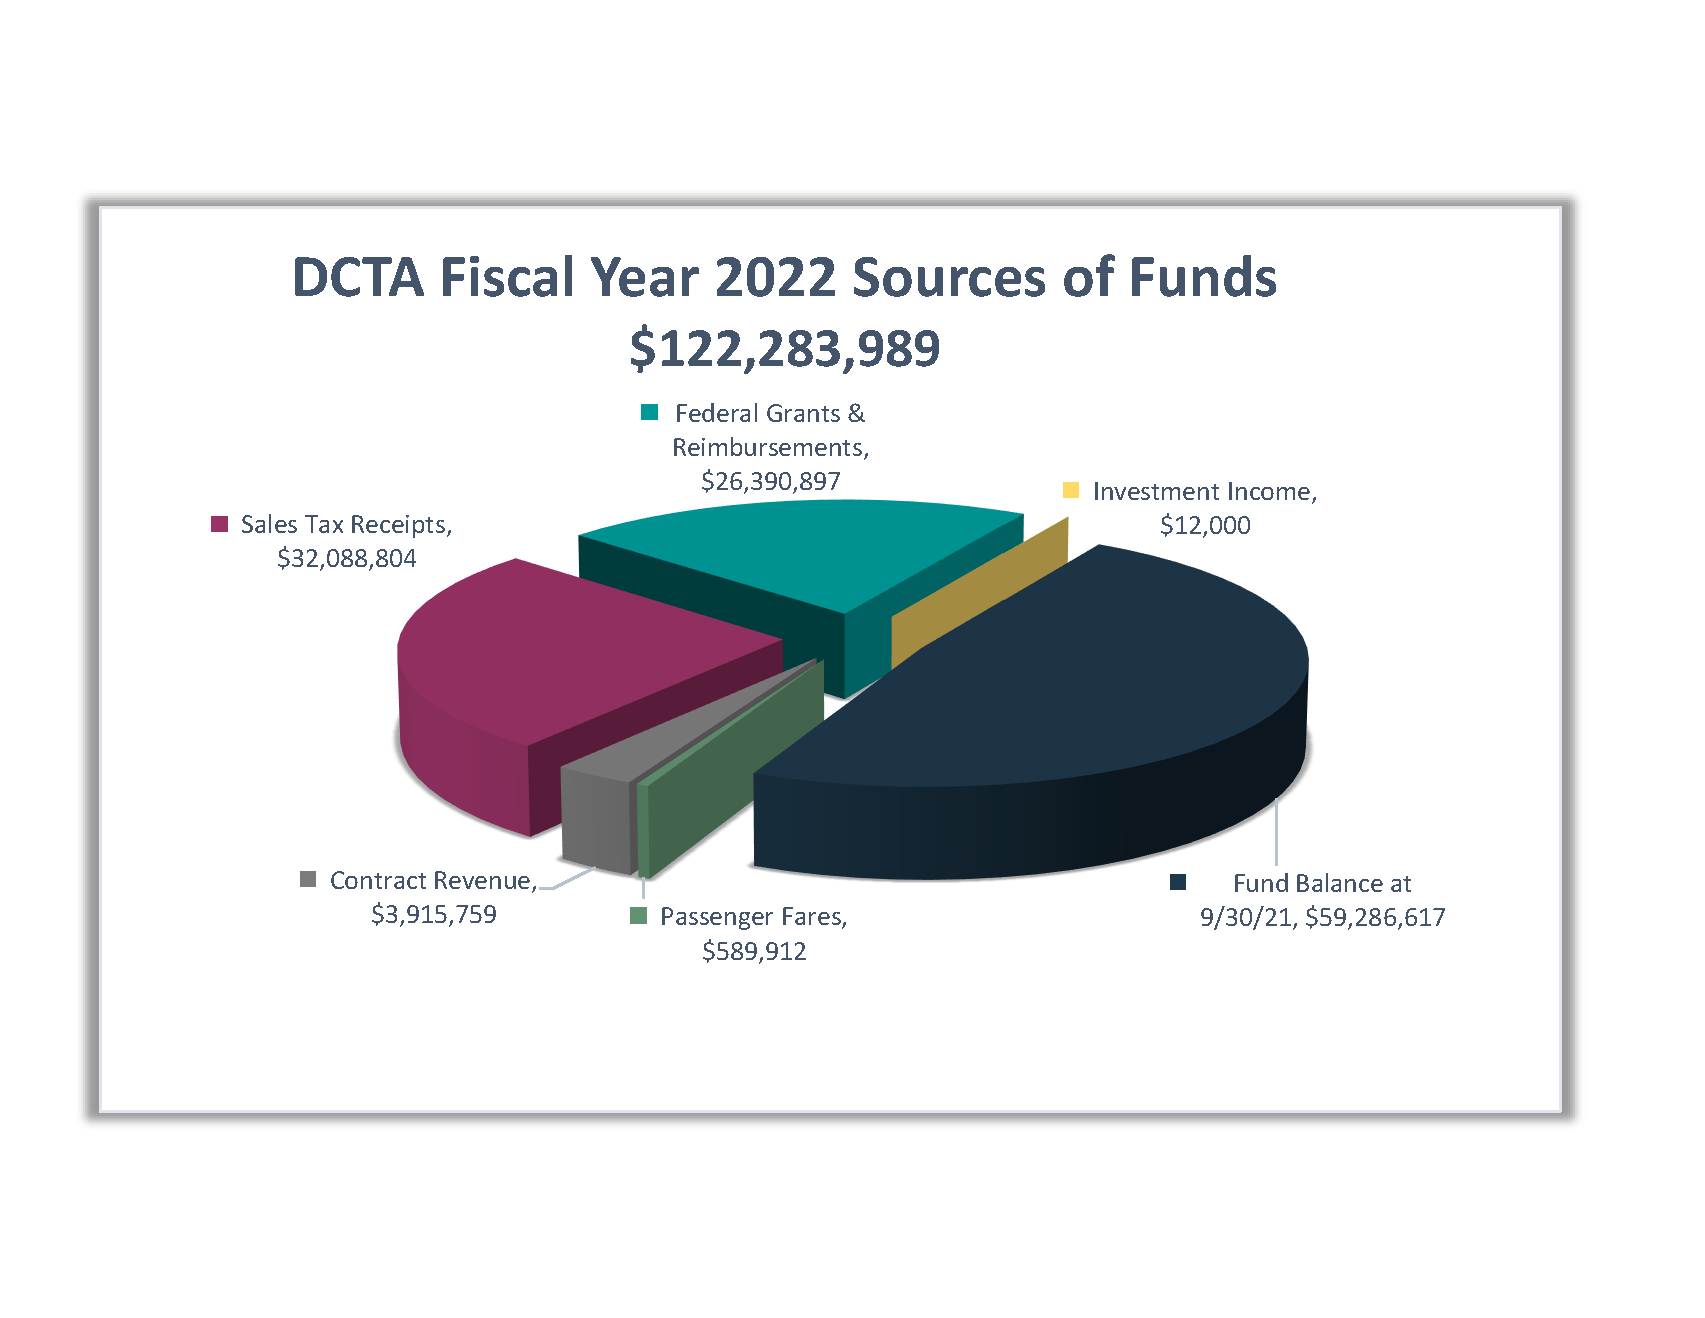 FY22 Sources of Funds